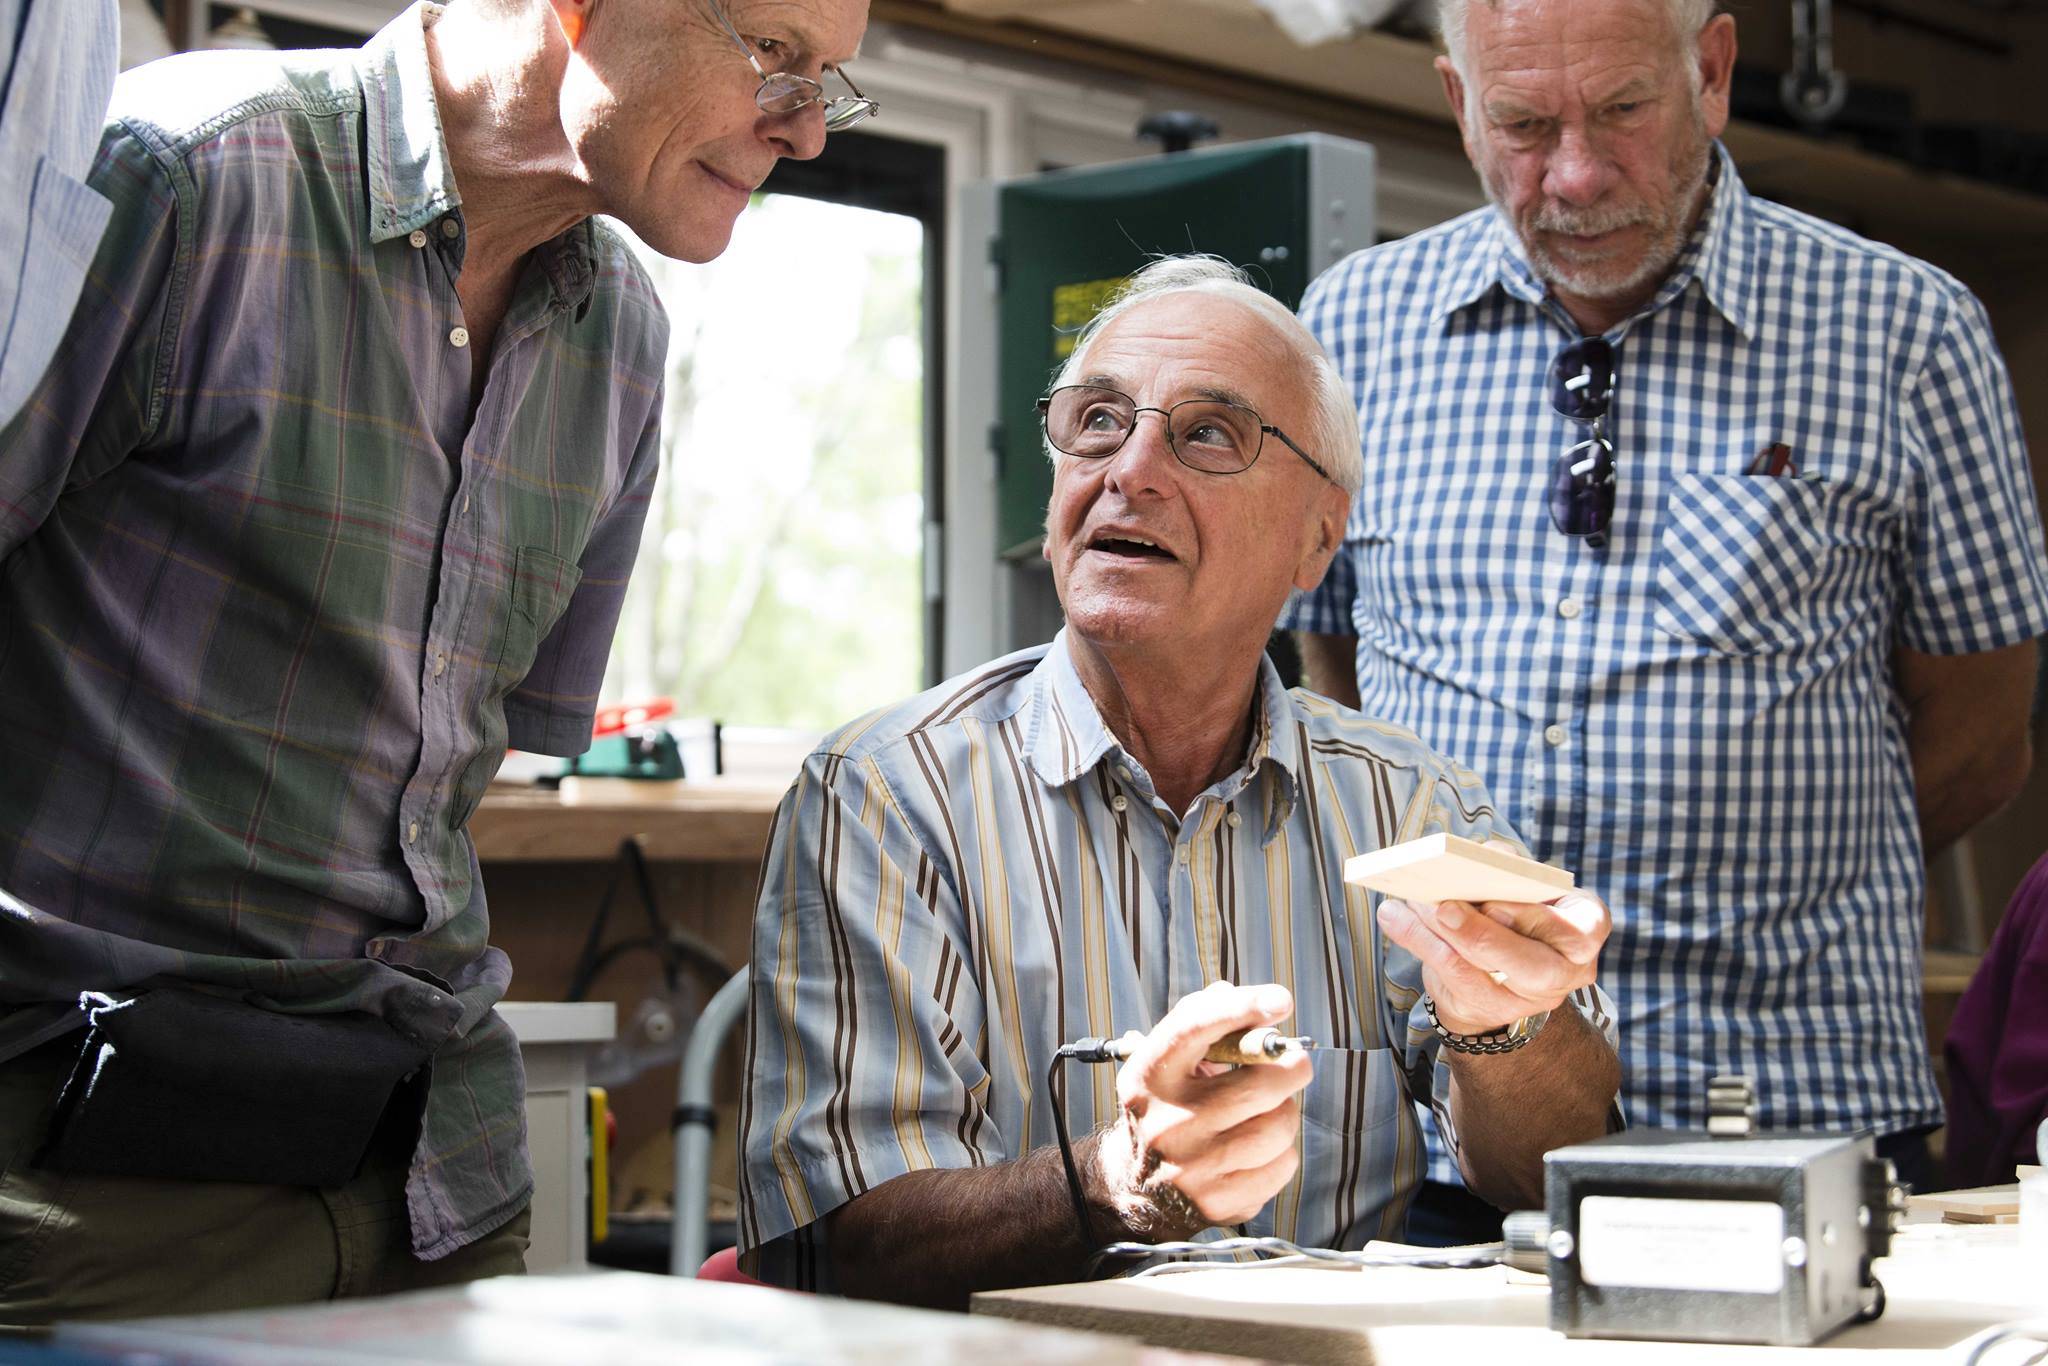 Men’s Sheds: social spaces to tackle loneliness